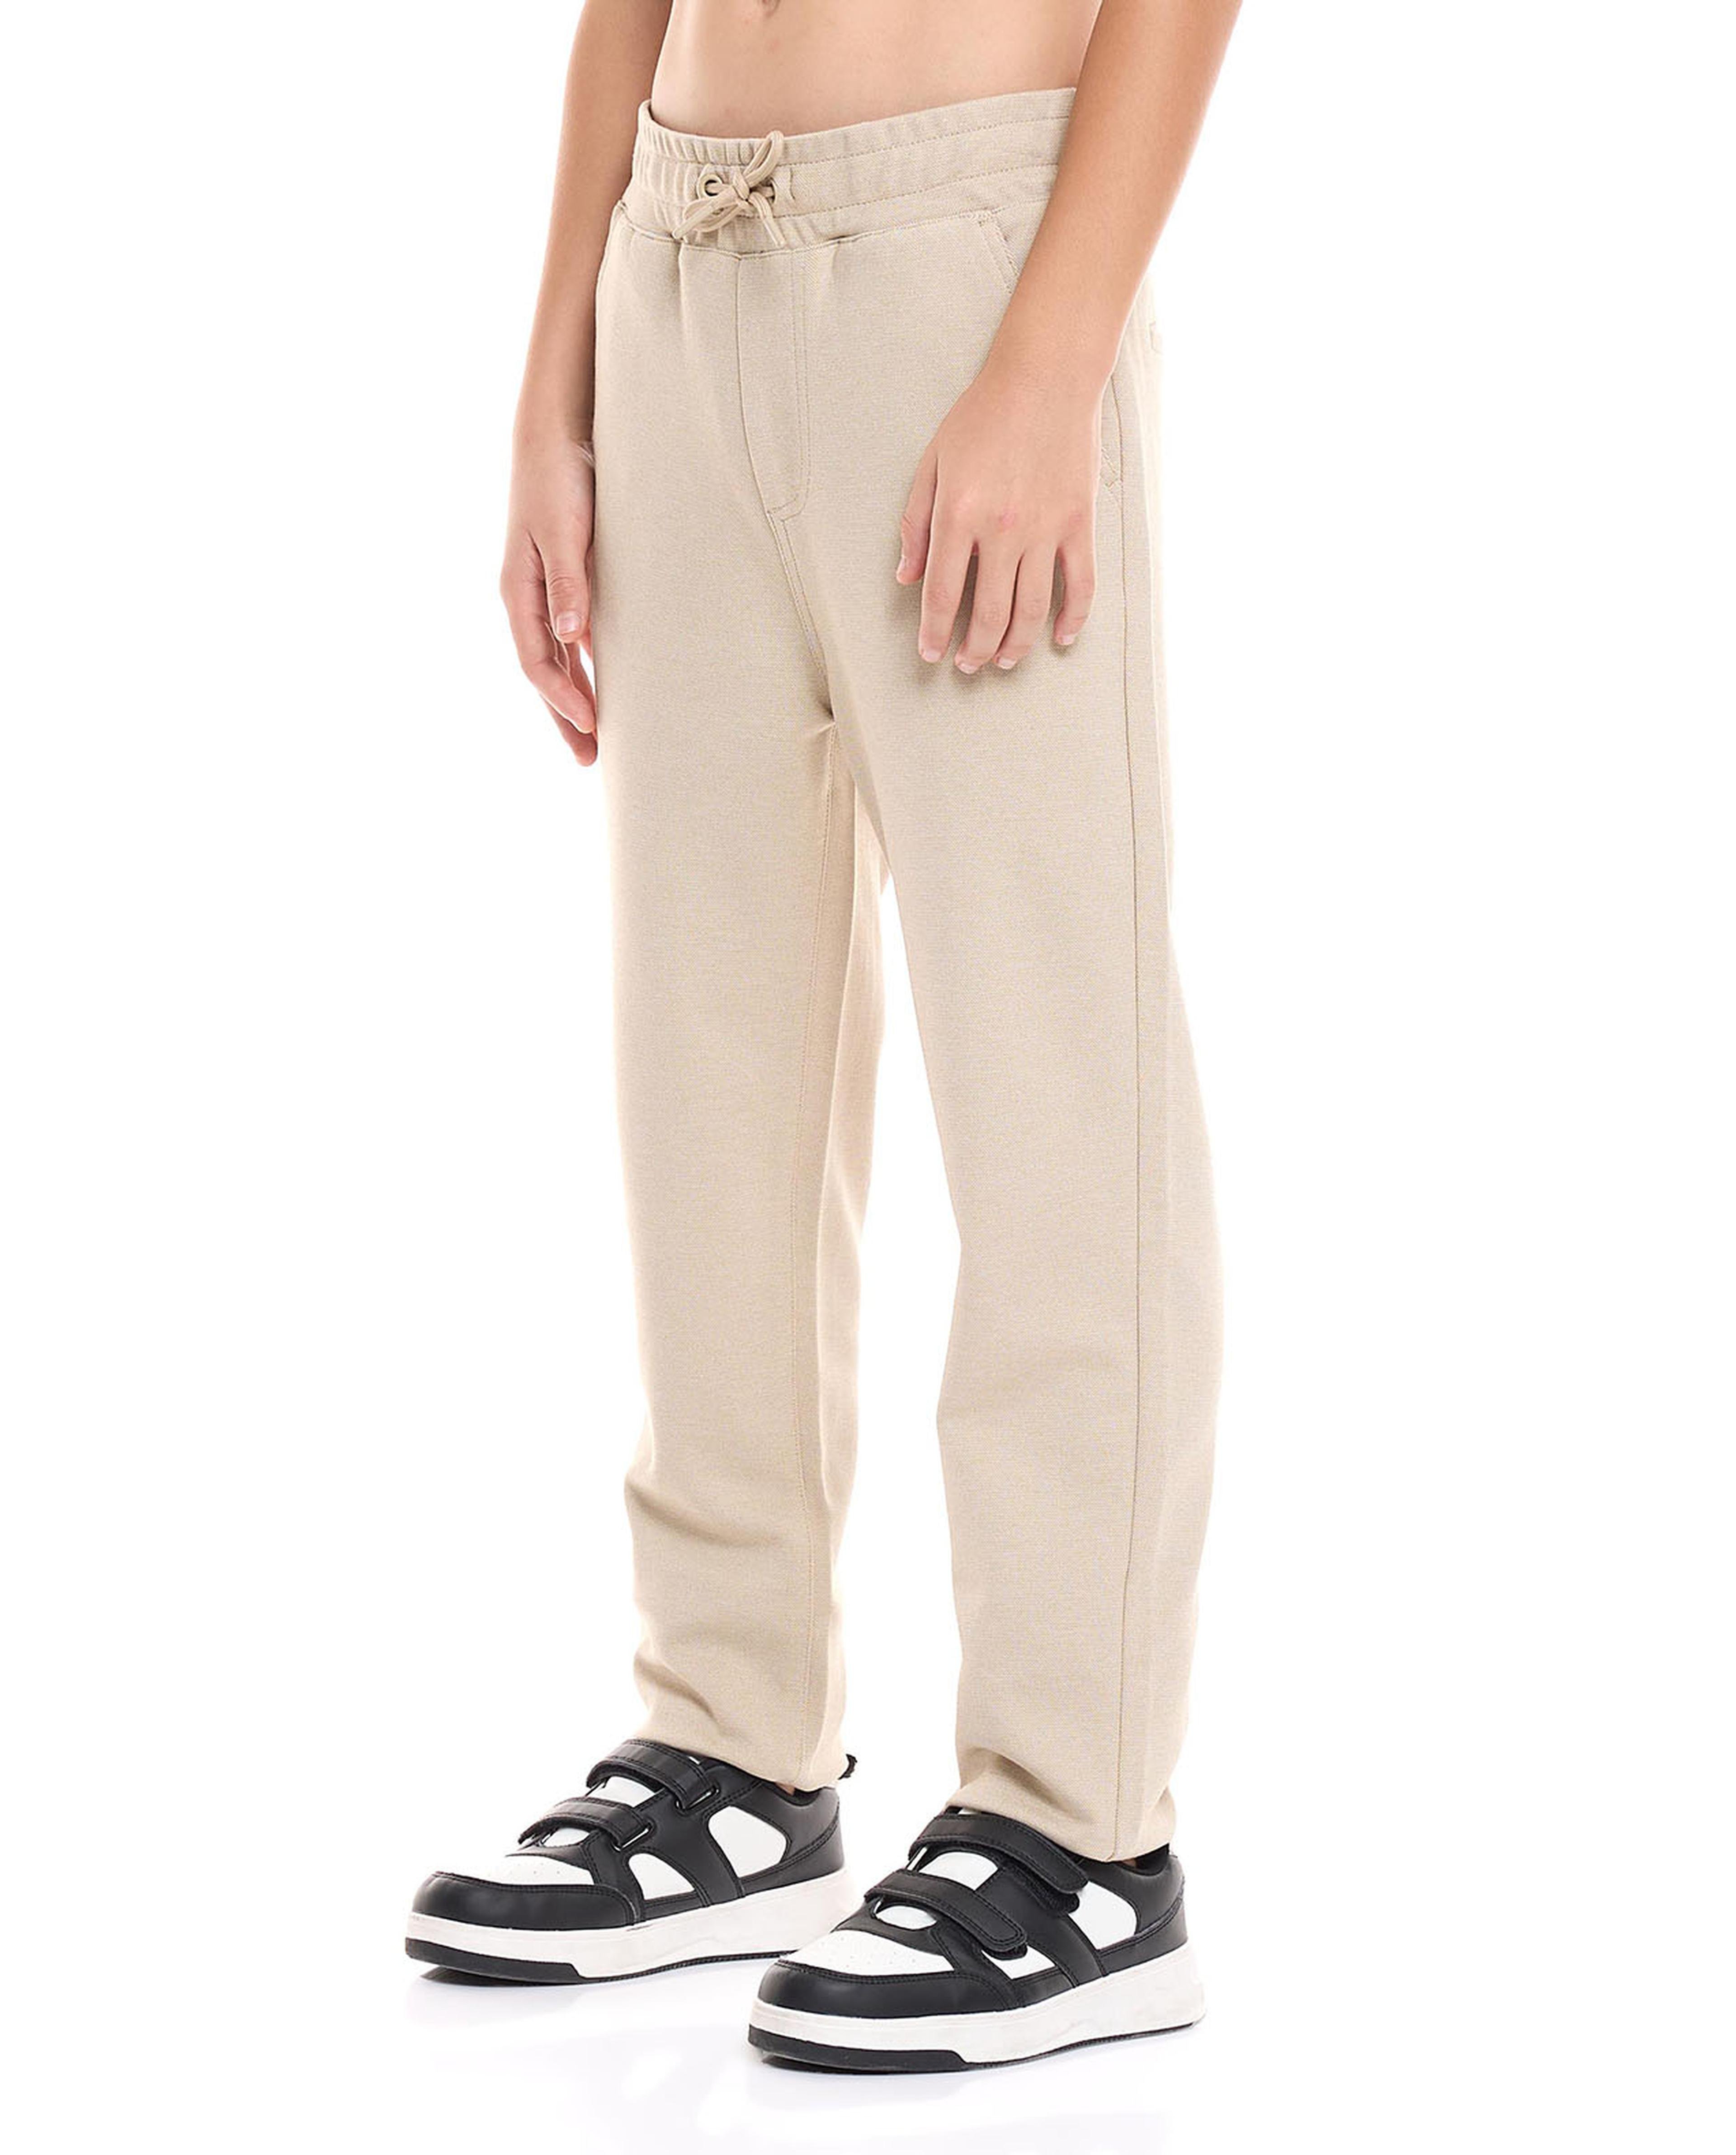 Solid Knit Pants with Drawstring Waist